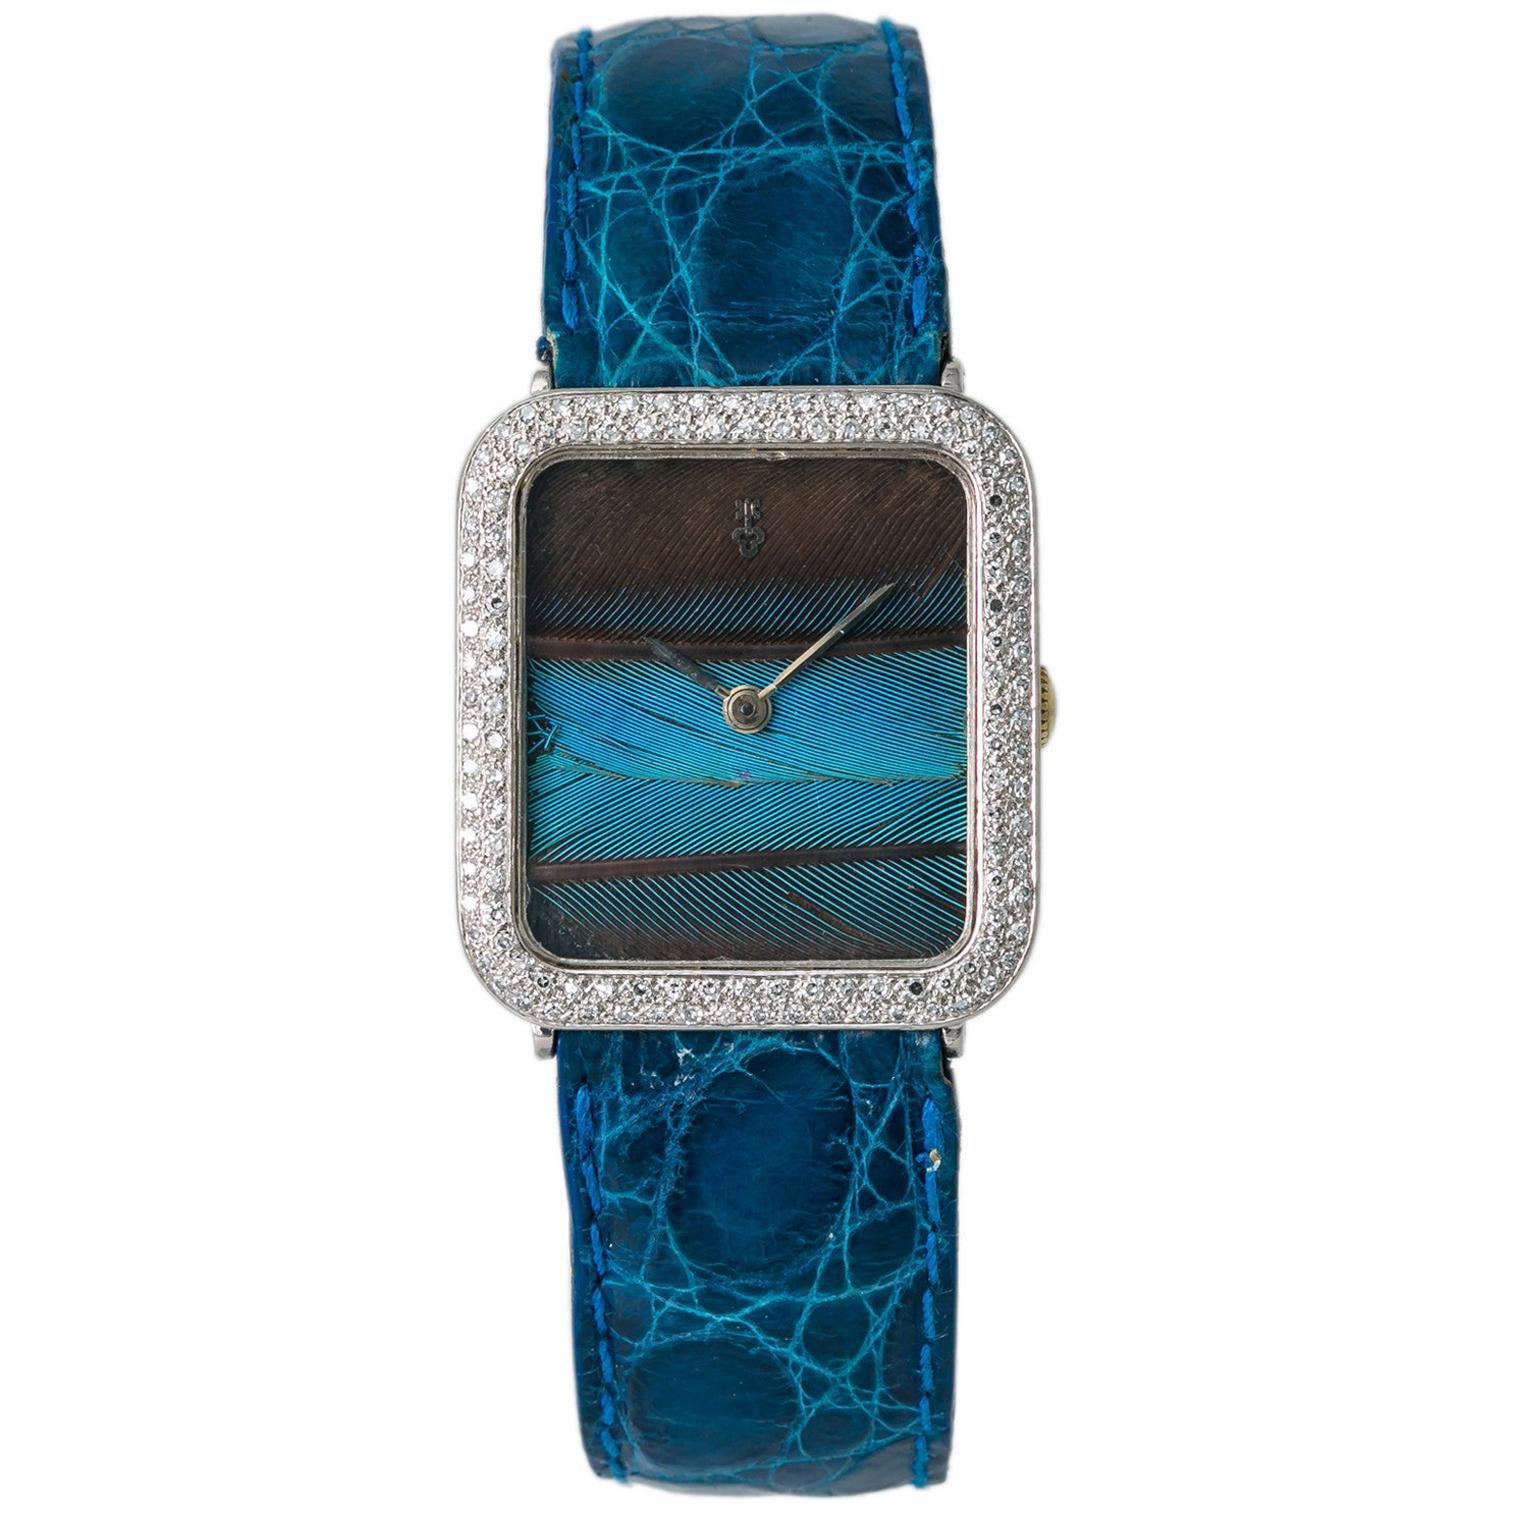 Corum Peacock 27536, Blue Dial, Certified and Warranty For Sale